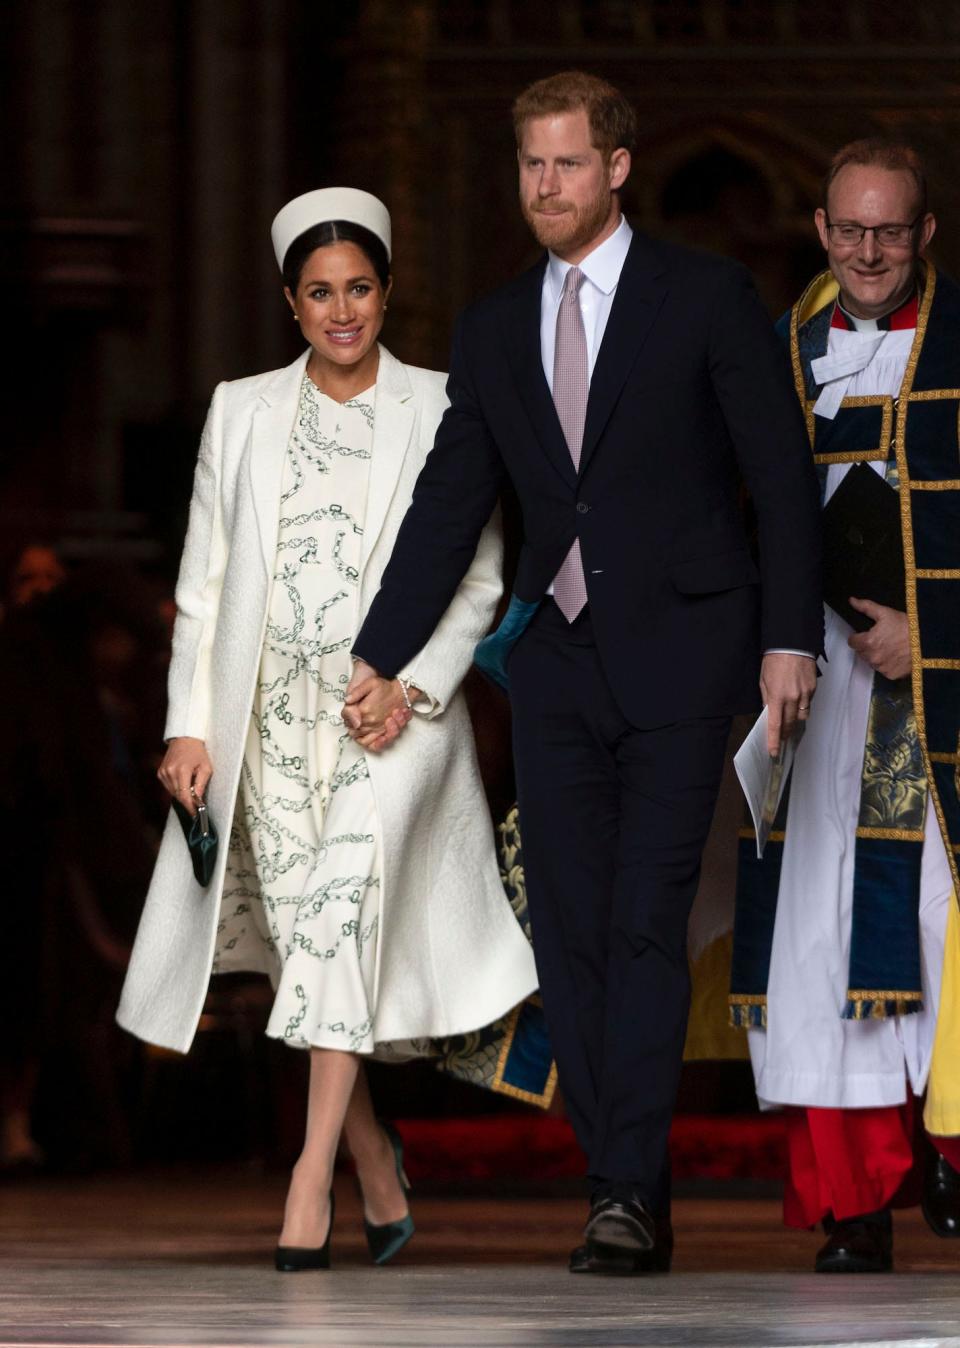 Meghan Markle and Prince Harry at the Commonwealth Day Service on March 11, 2019.